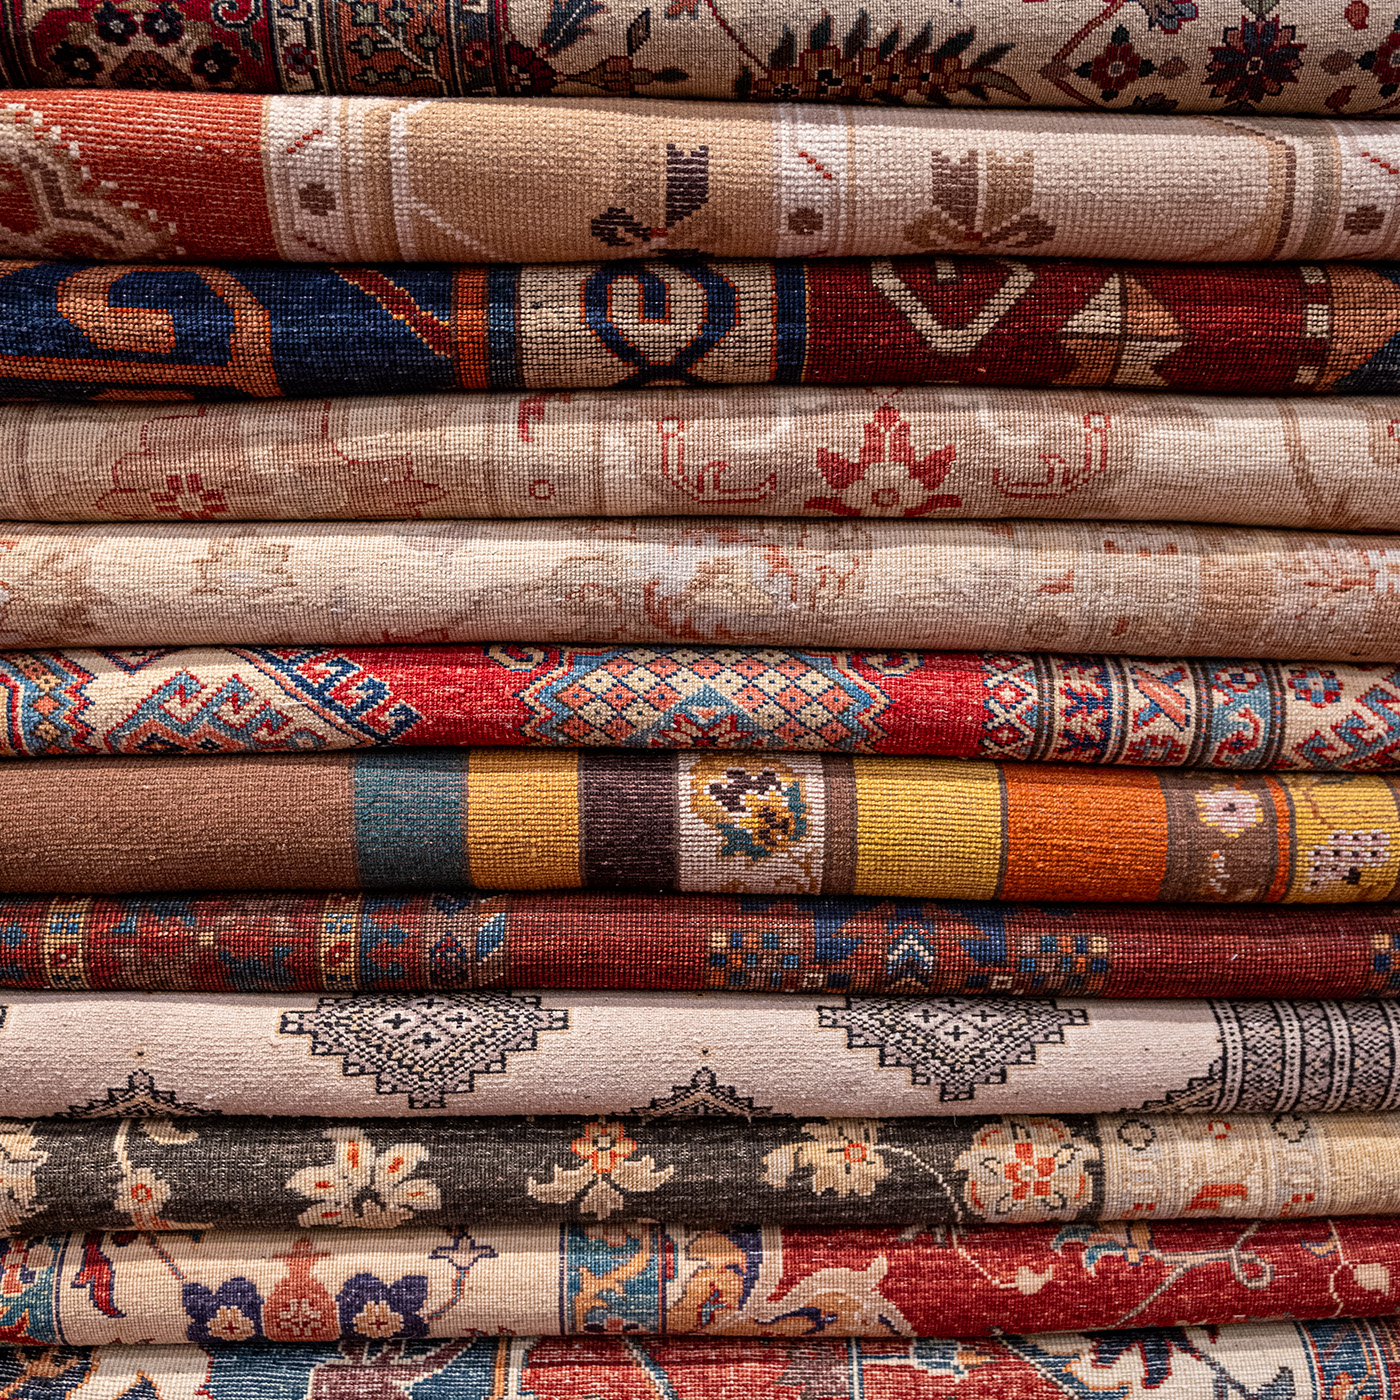 Stack of folded carpets in warm colors